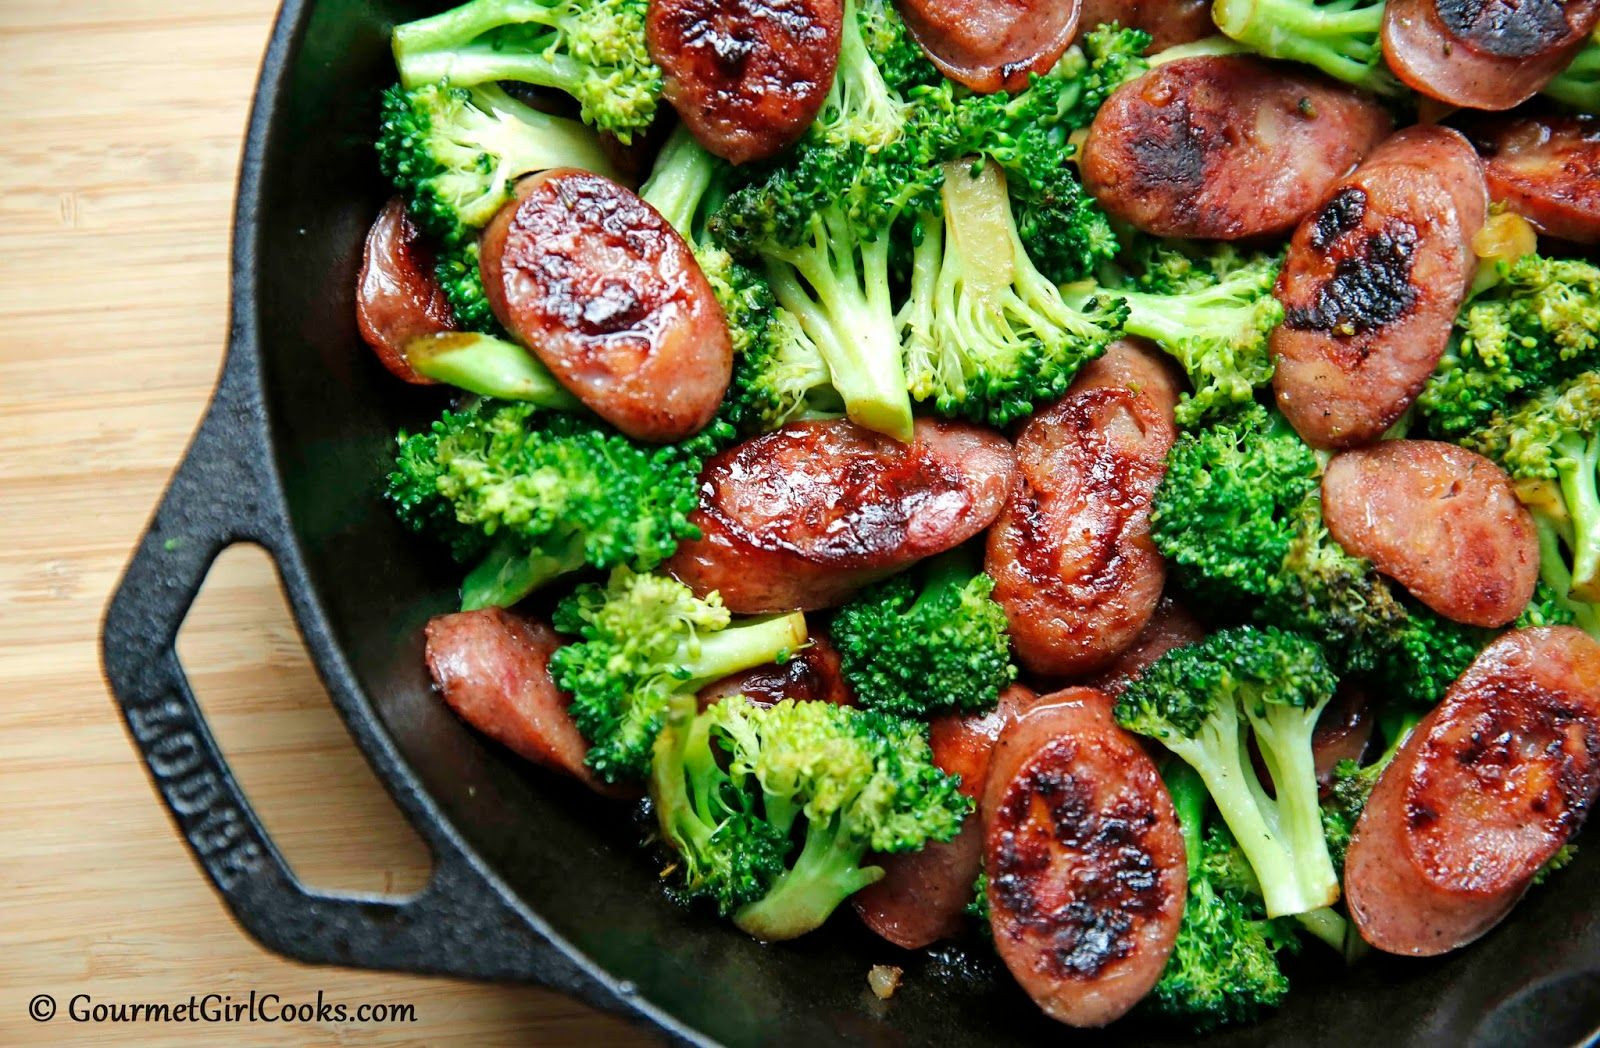 Turkey Sausage Recipes Low Carb
 Gourmet Girl Cooks Sausage & Broccoli Quick Easy Low